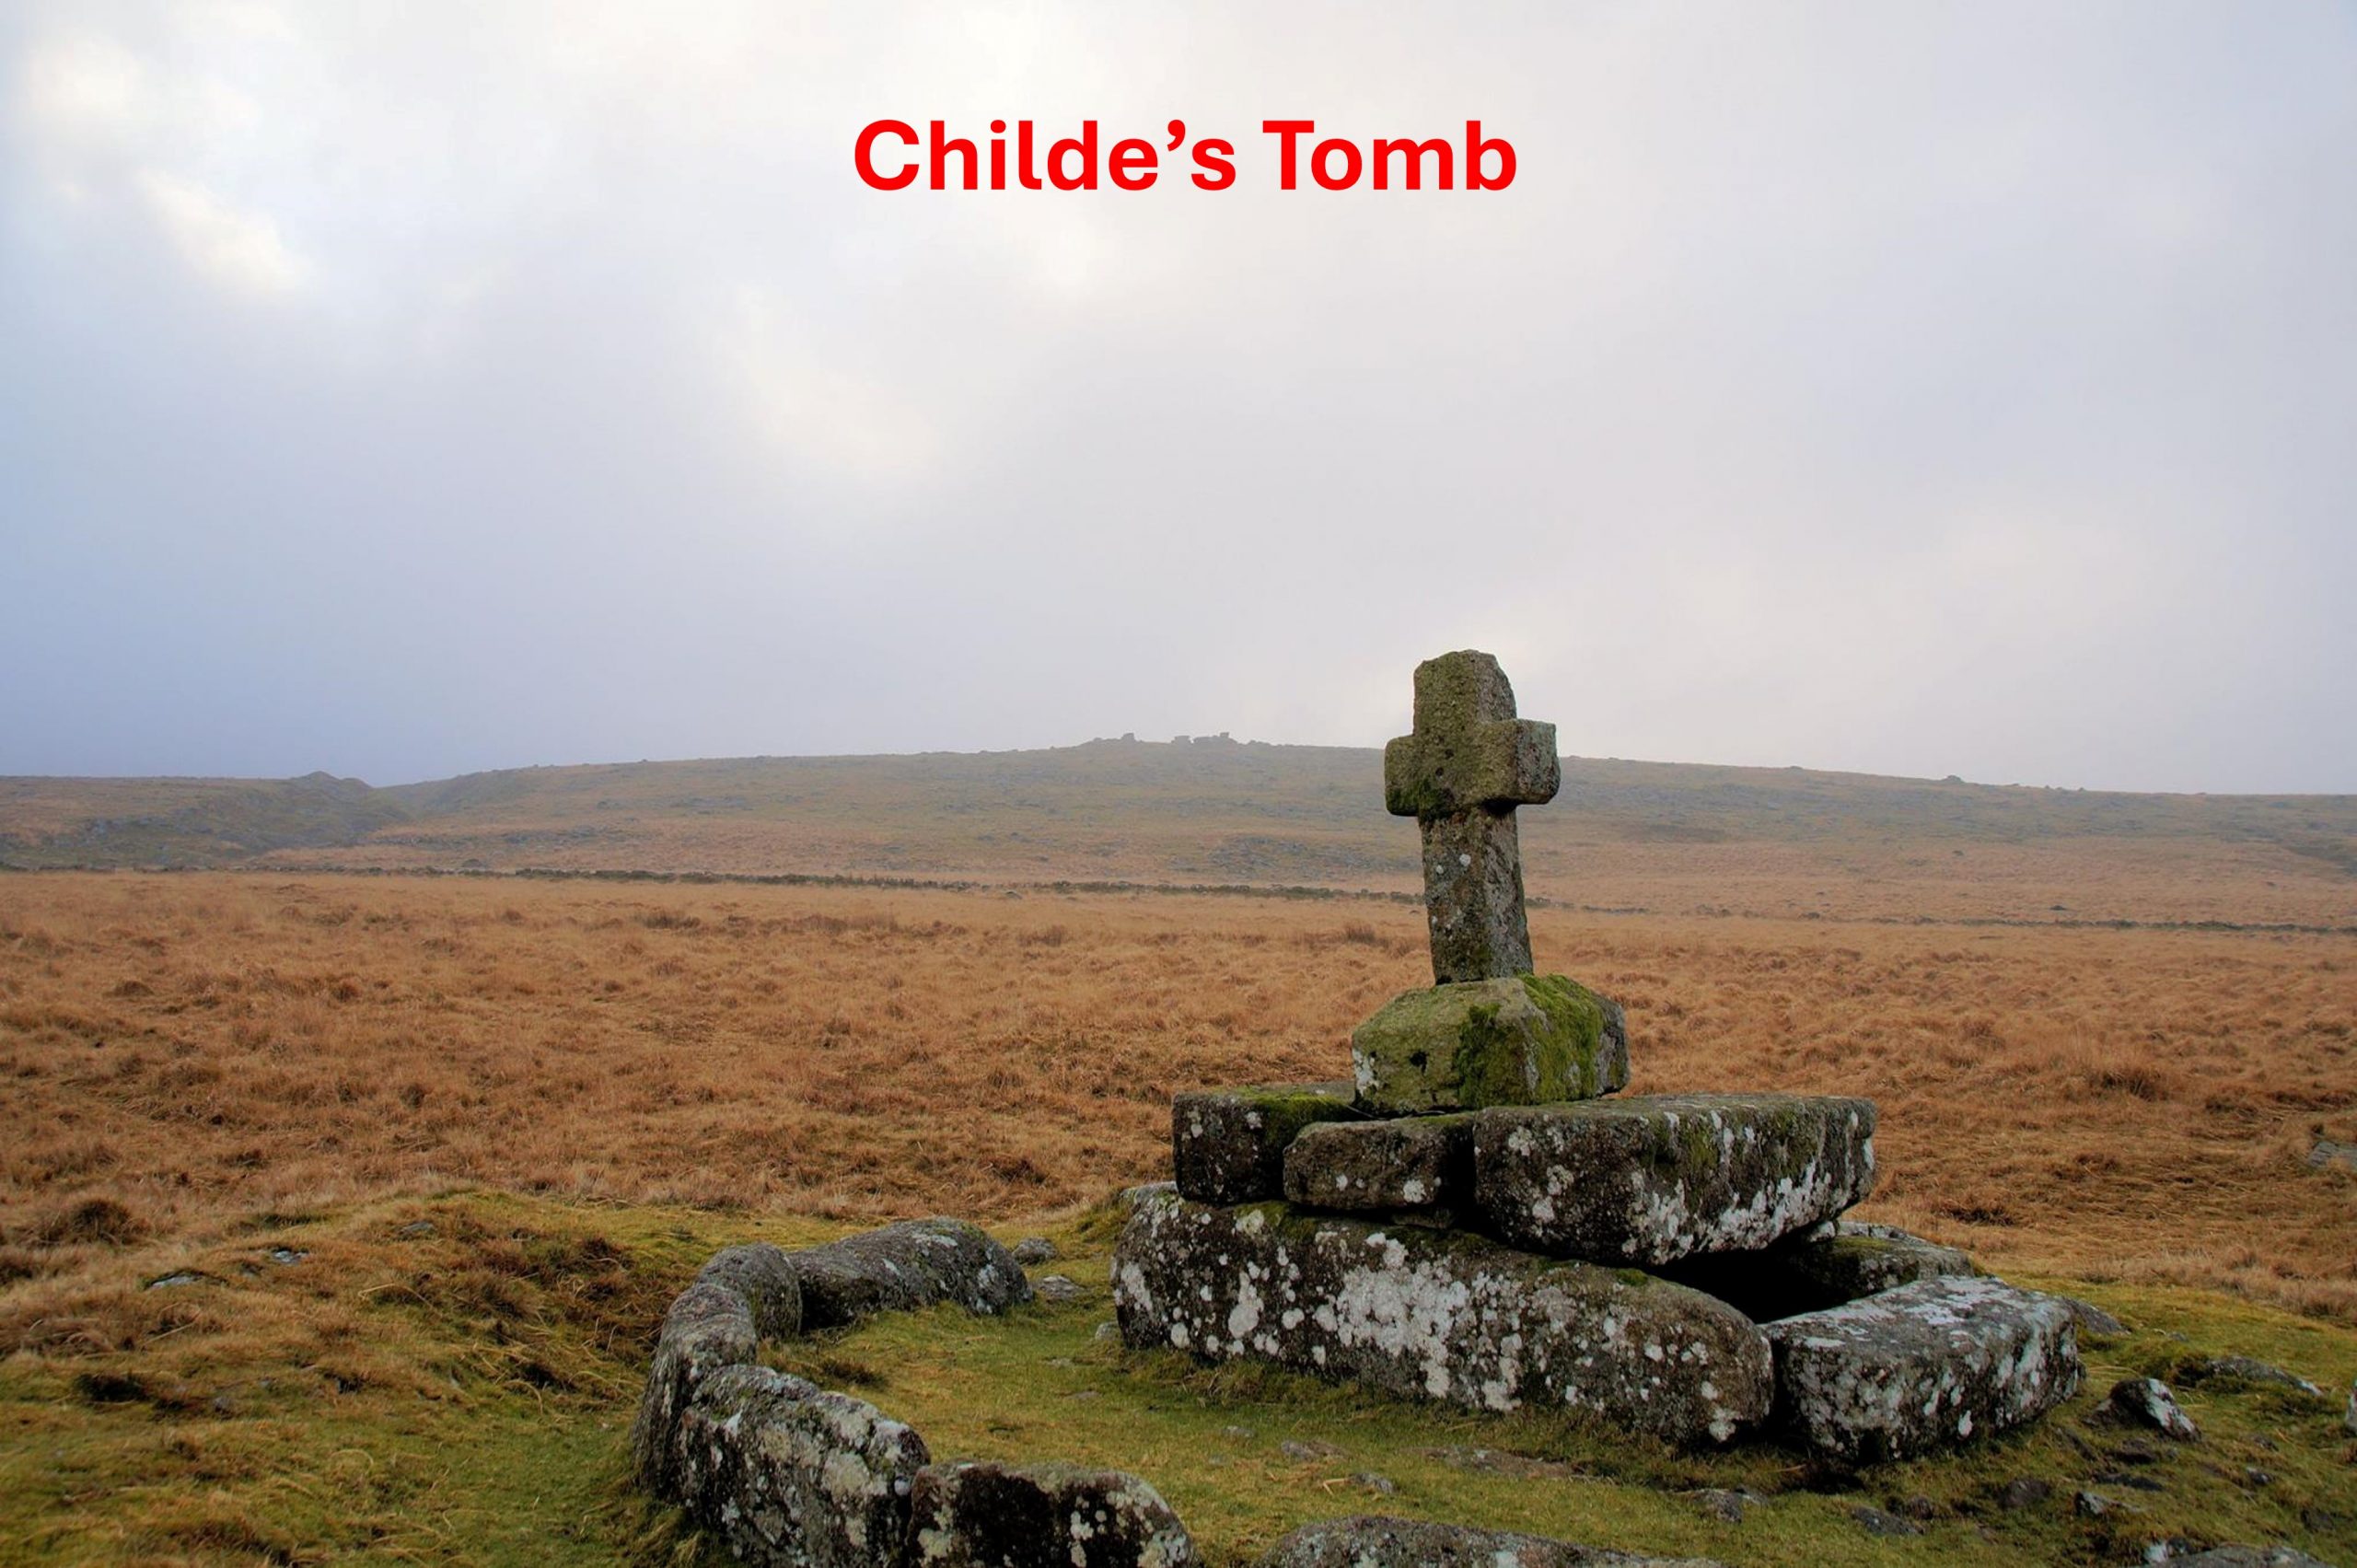 8. Childes Tomb a